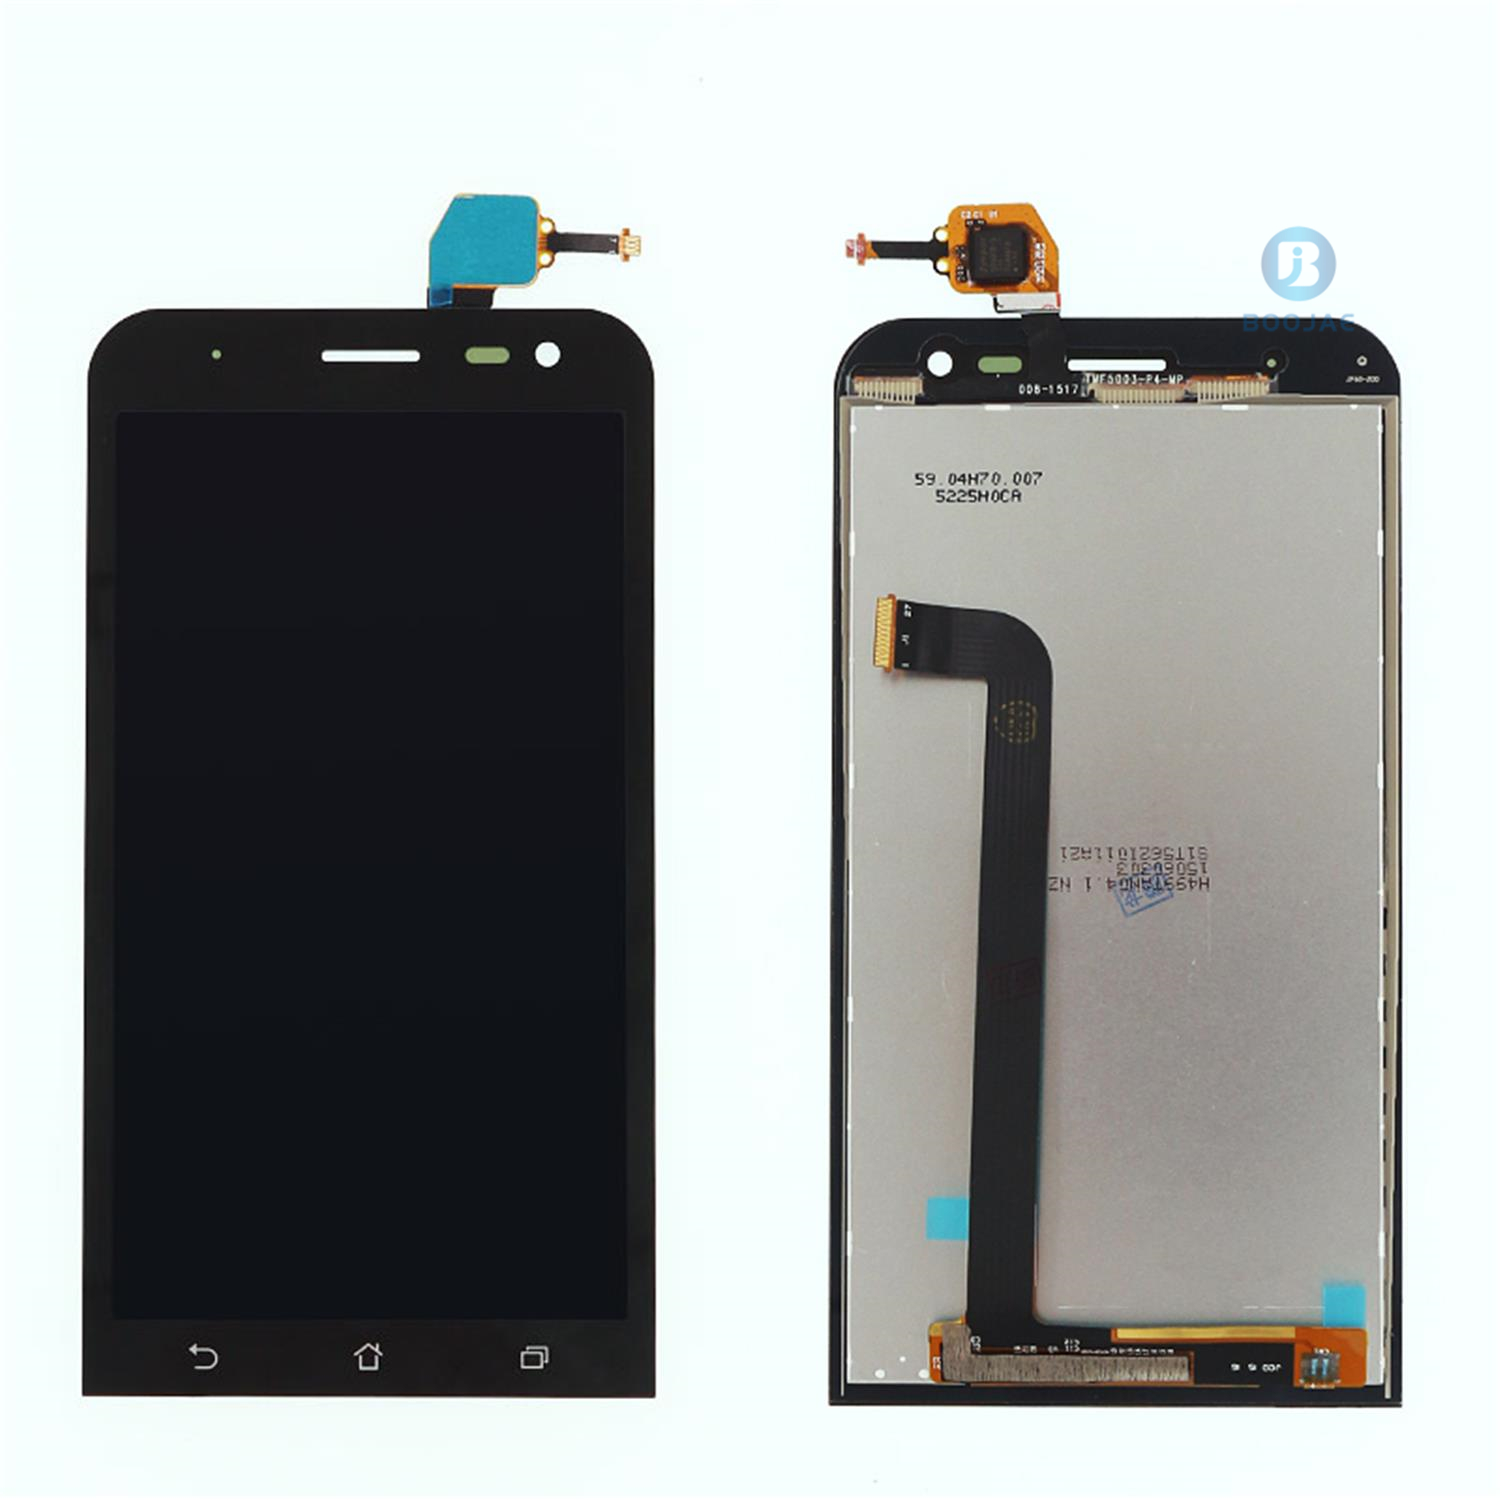 Asus Zenfone ZE500KL LCD Screen Display, Lcd Assembly Replacement